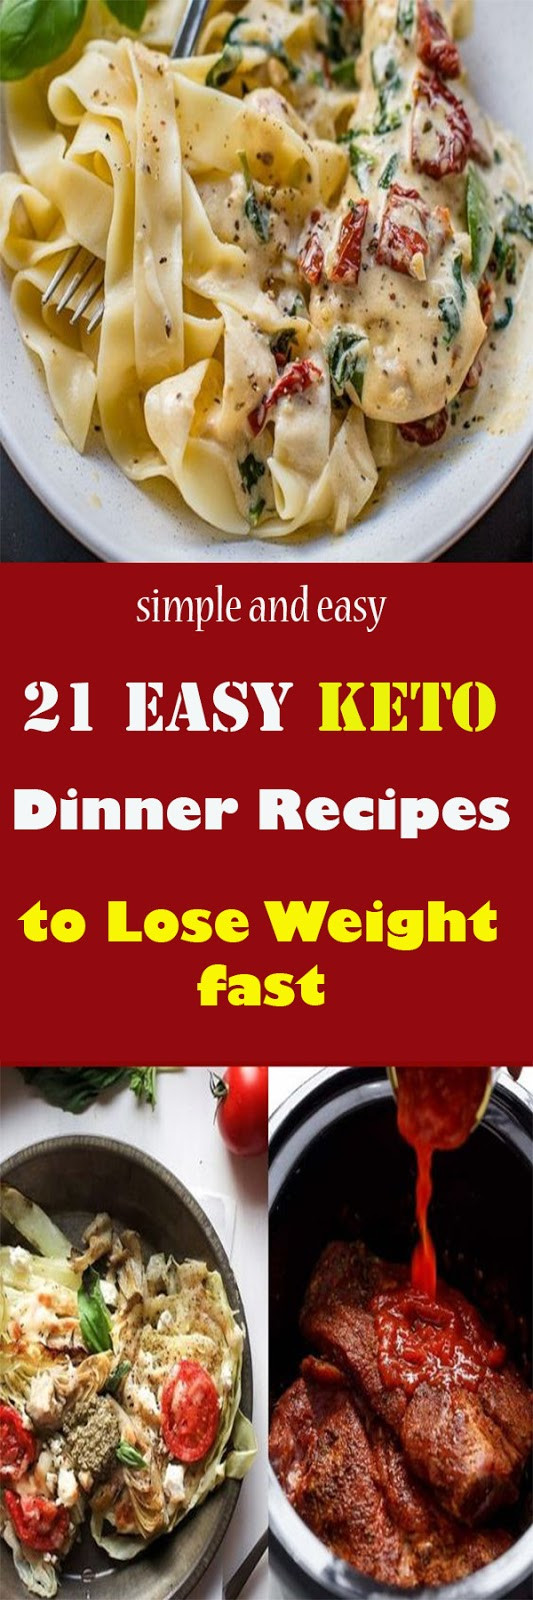 Healthy Keto Dinner Recipes For Weight Loss
 The Ketogenic Diet is increasingly popular thanks to its